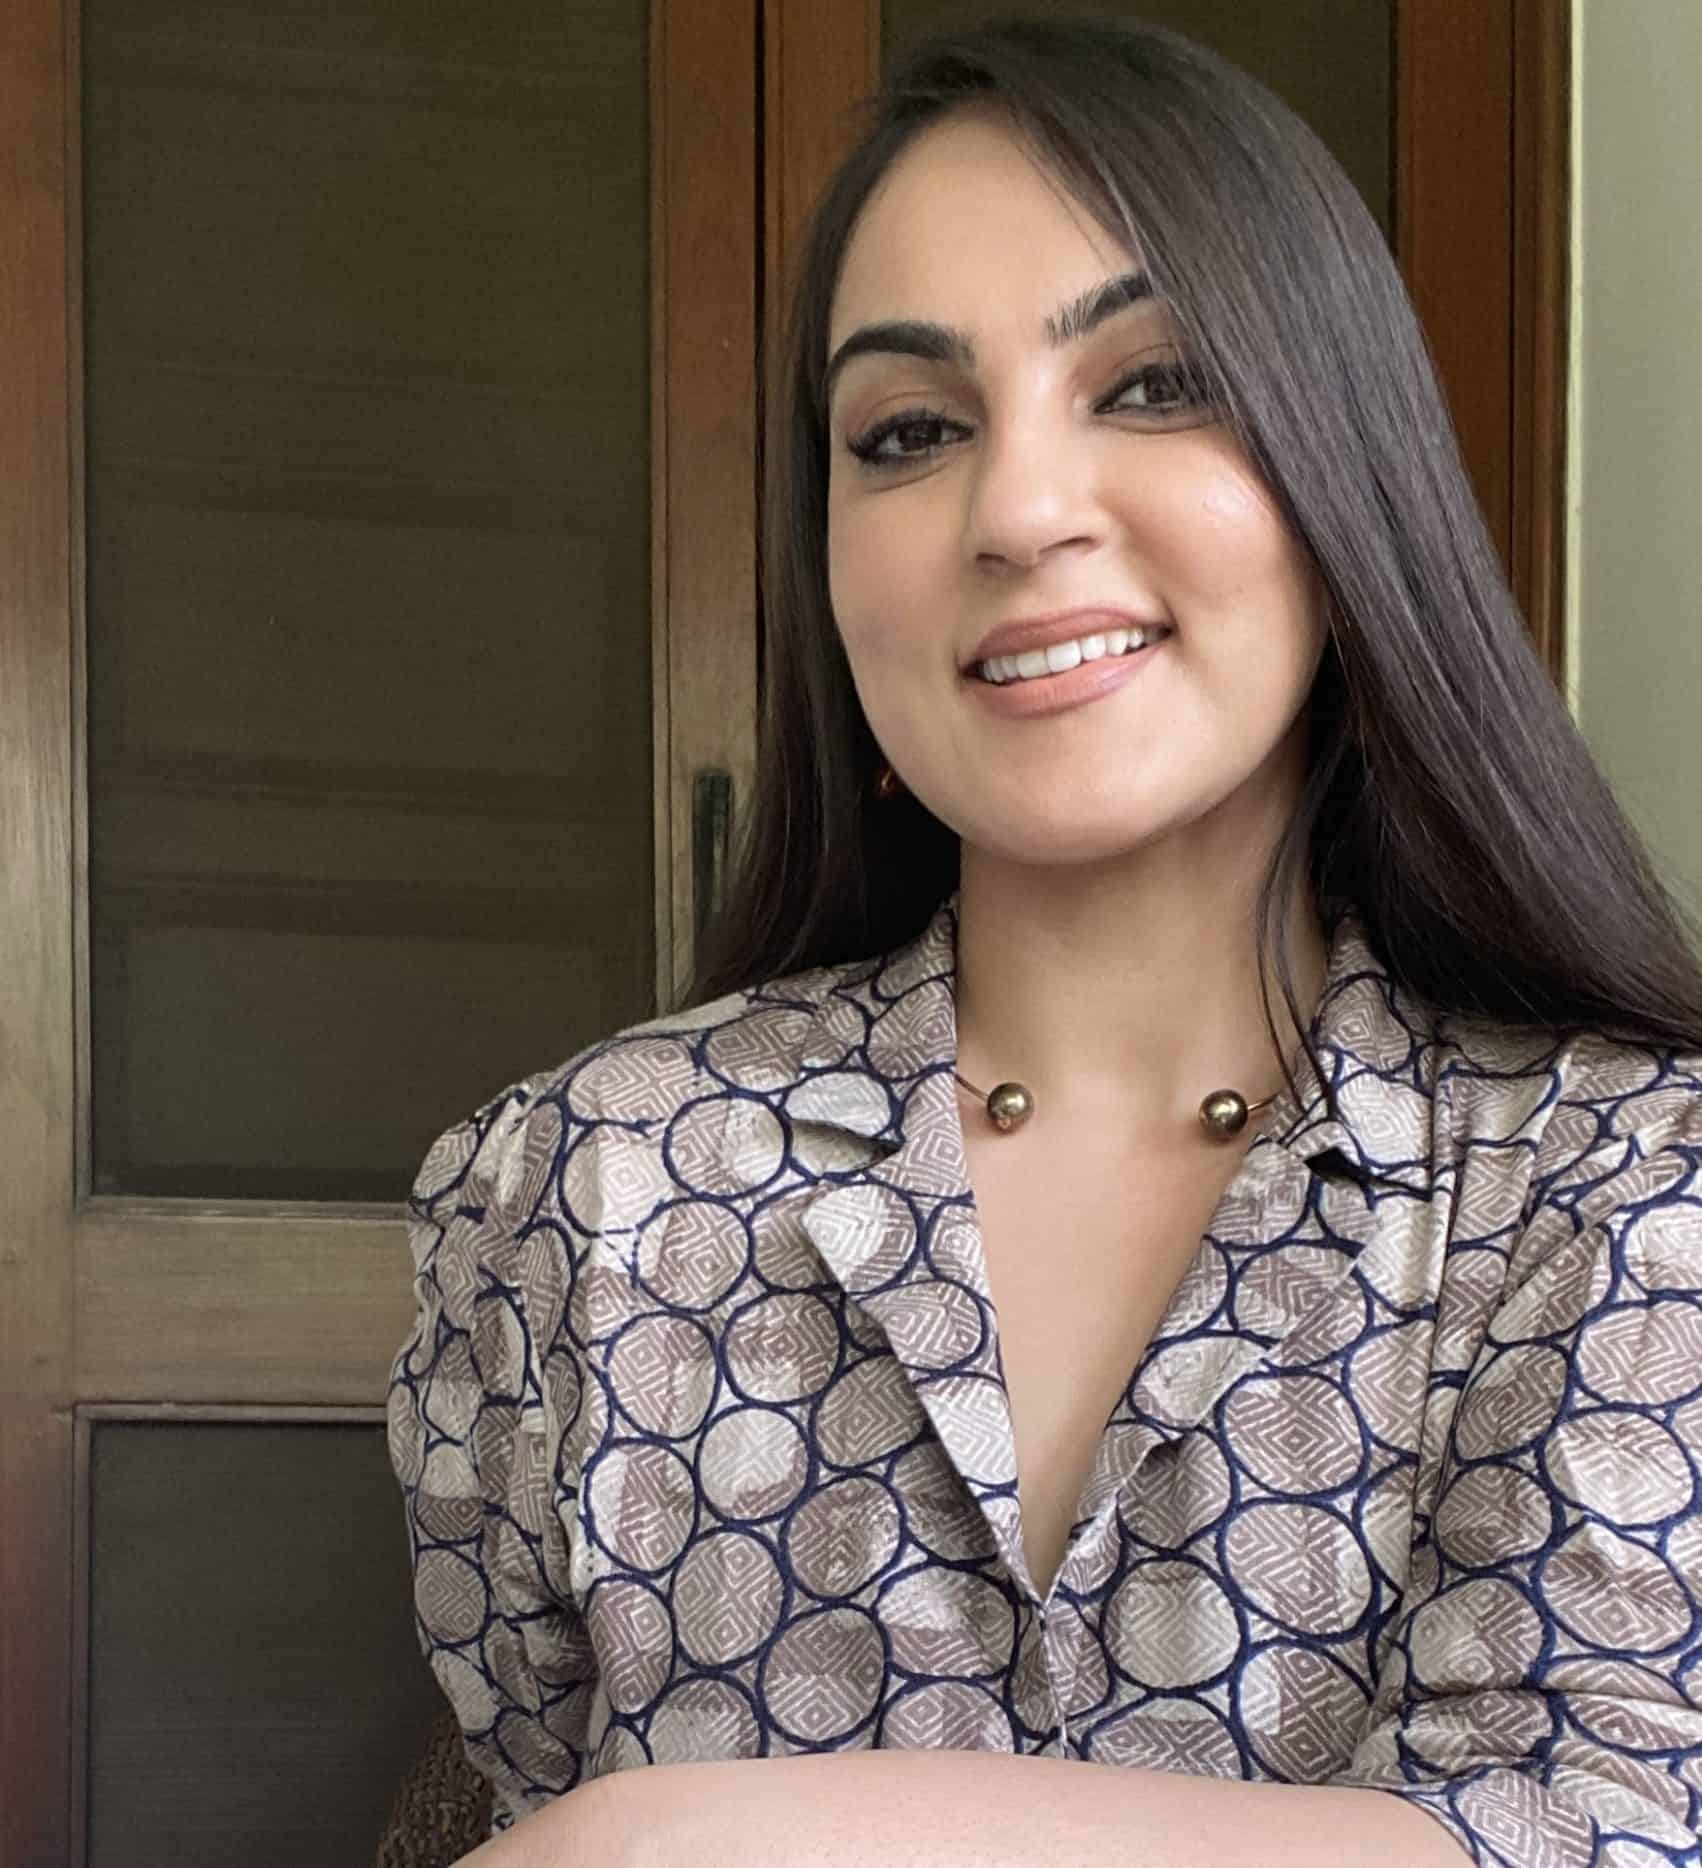 Noor has long dark brown hair and fair skin. She smiles at the camera in front of wooden doors and wears a neutral printed shirt. 